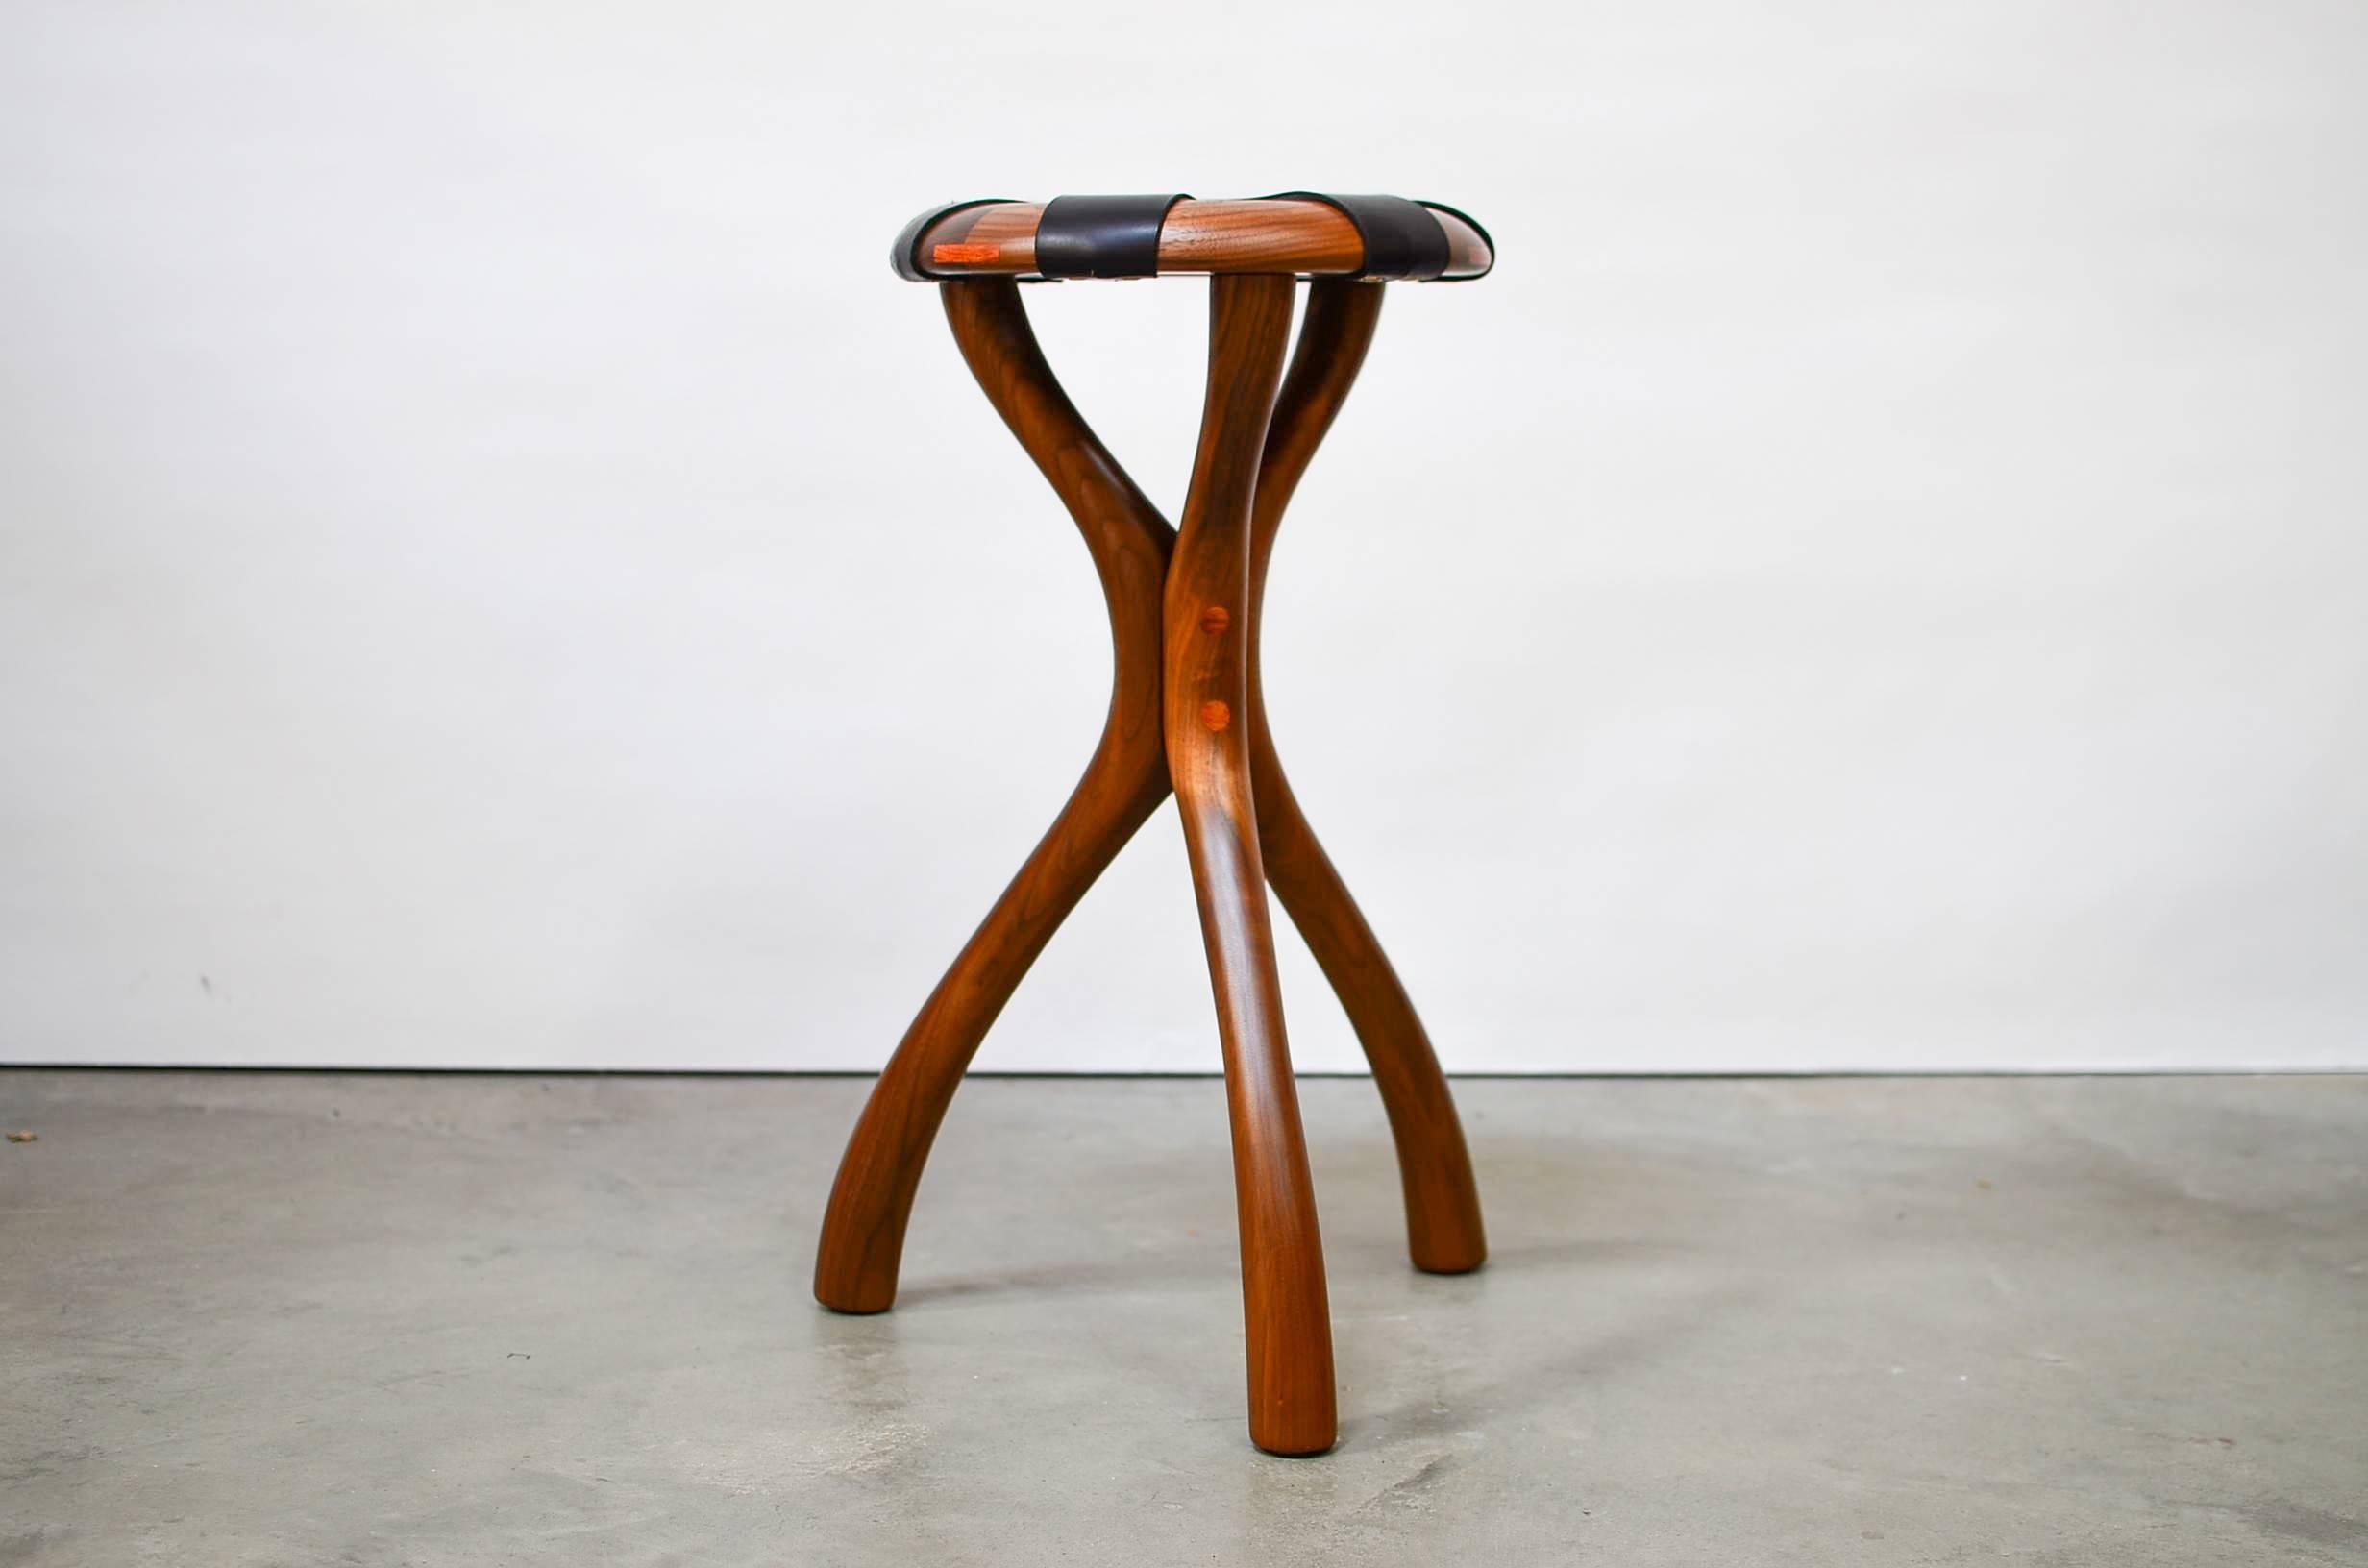 Black Walnut and Leather Stool by Dean Santner In Excellent Condition For Sale In Berkeley, CA